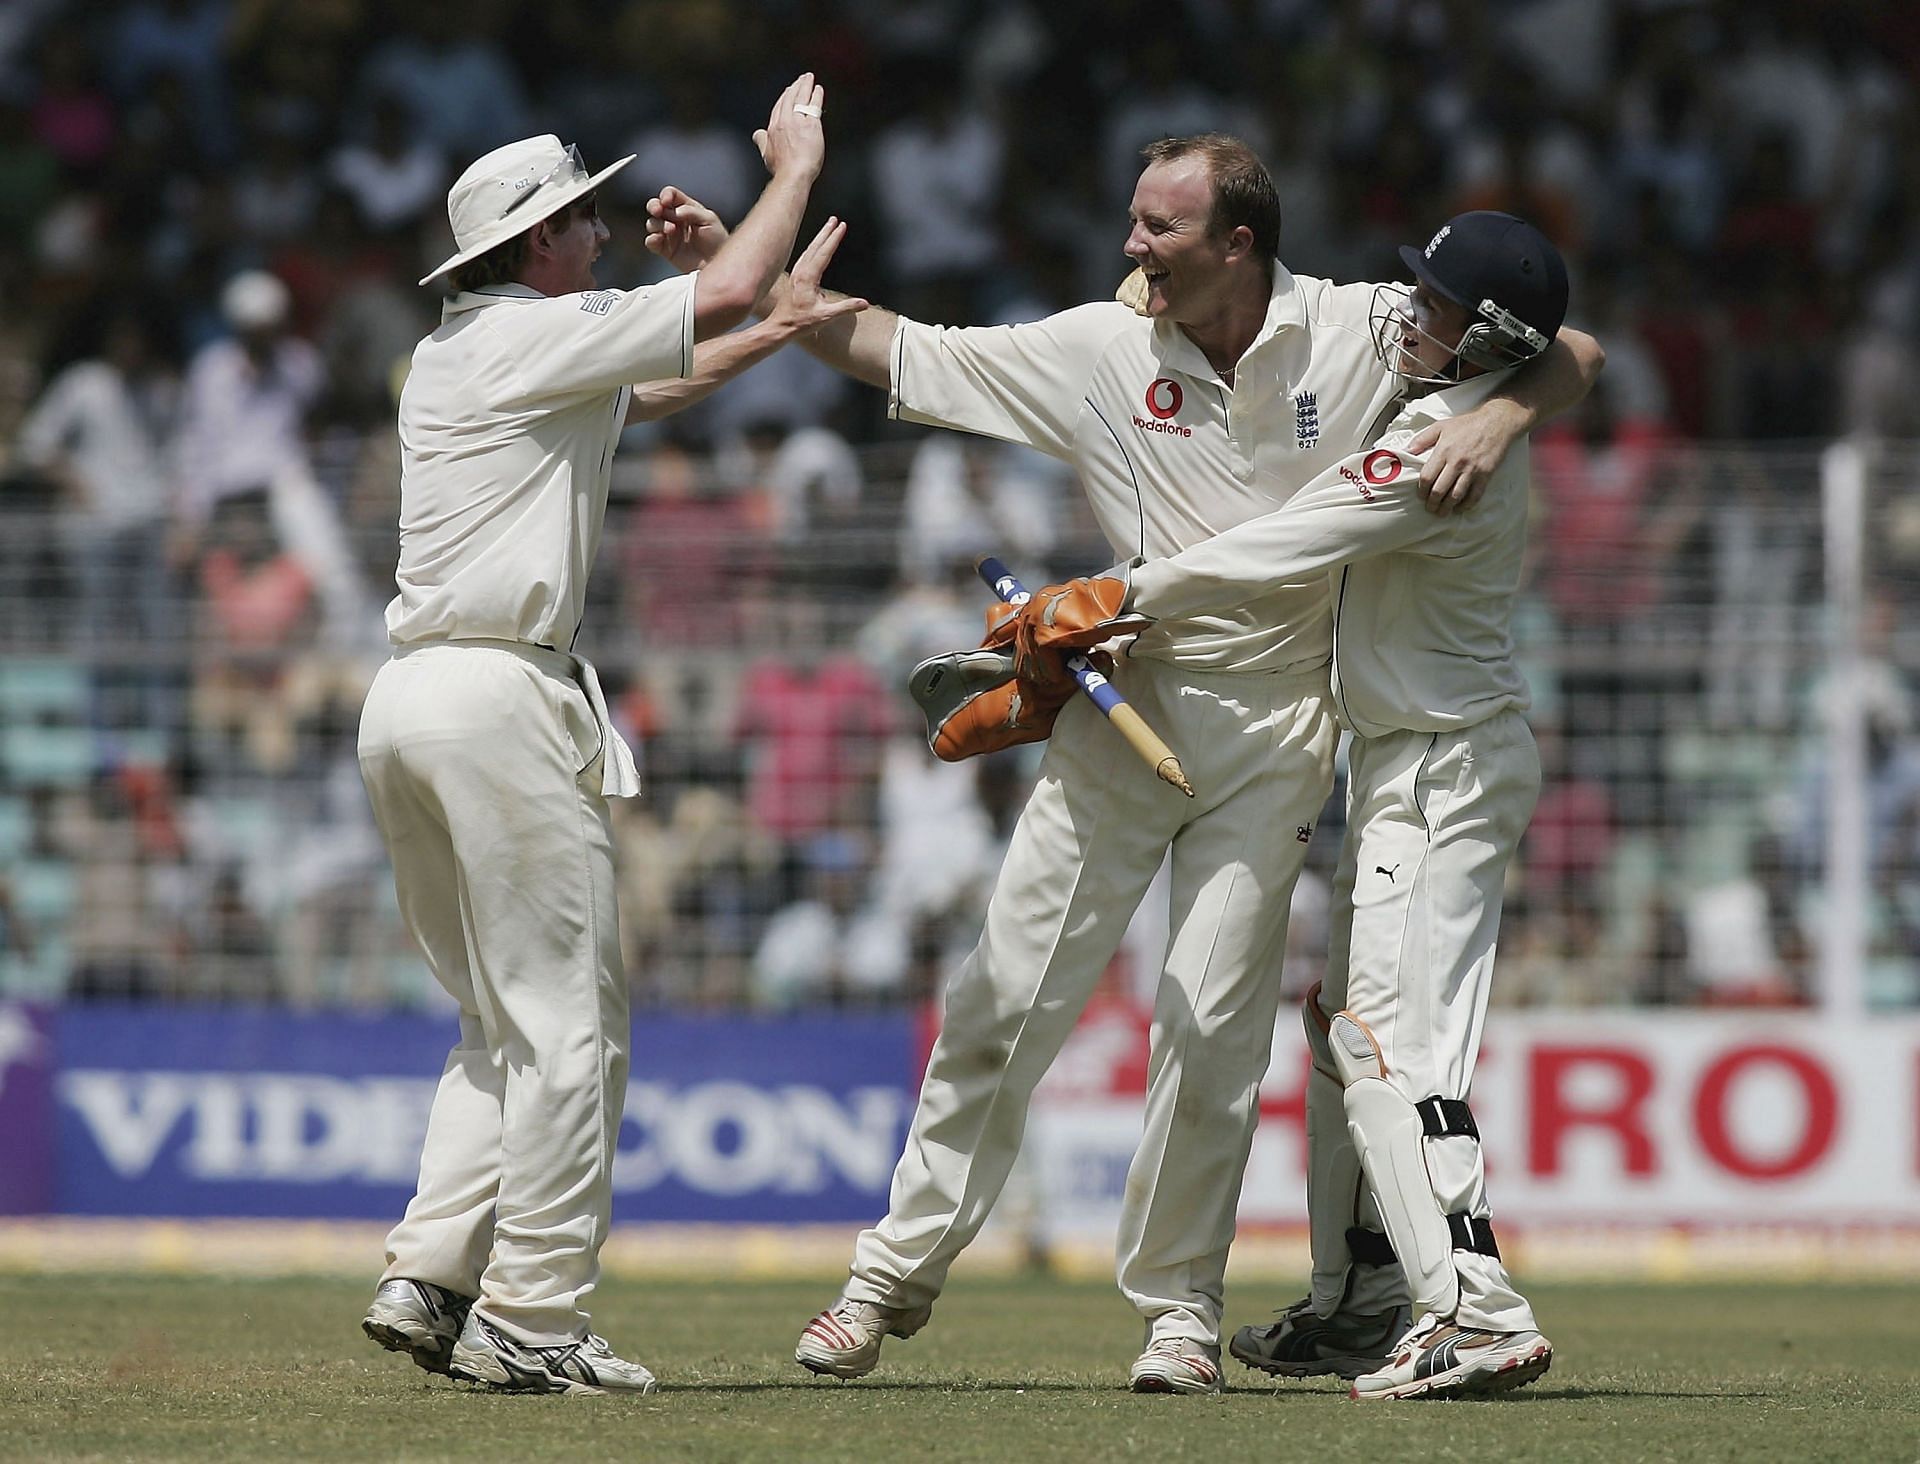 Shaun Udal celebrates a wicket with teammates in the 2006 Mumbai Test. (Pic: Getty Images)